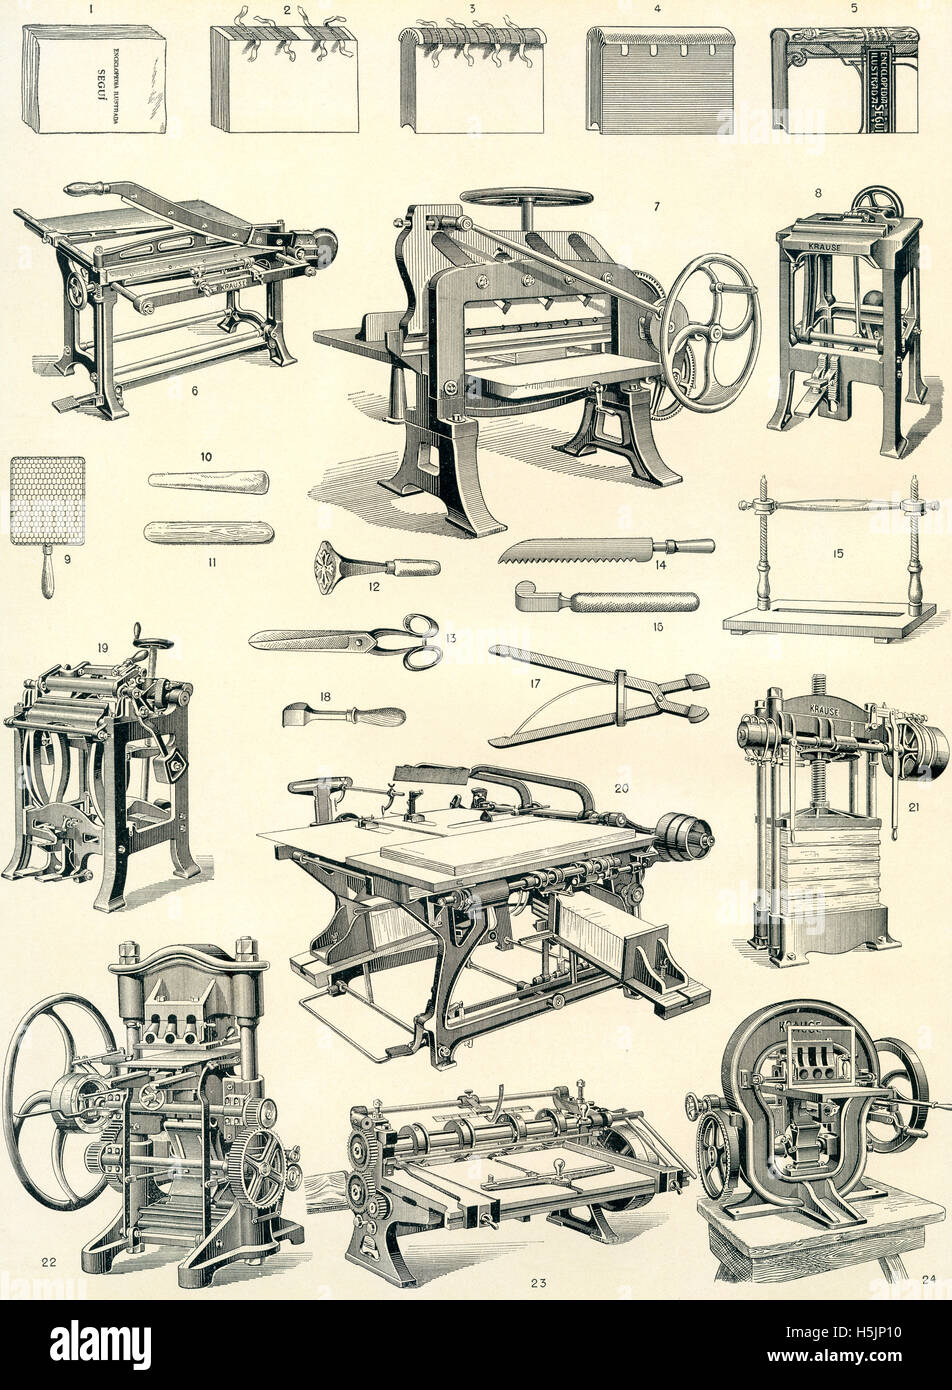 Examples of book binding and book binding tools and machinery from